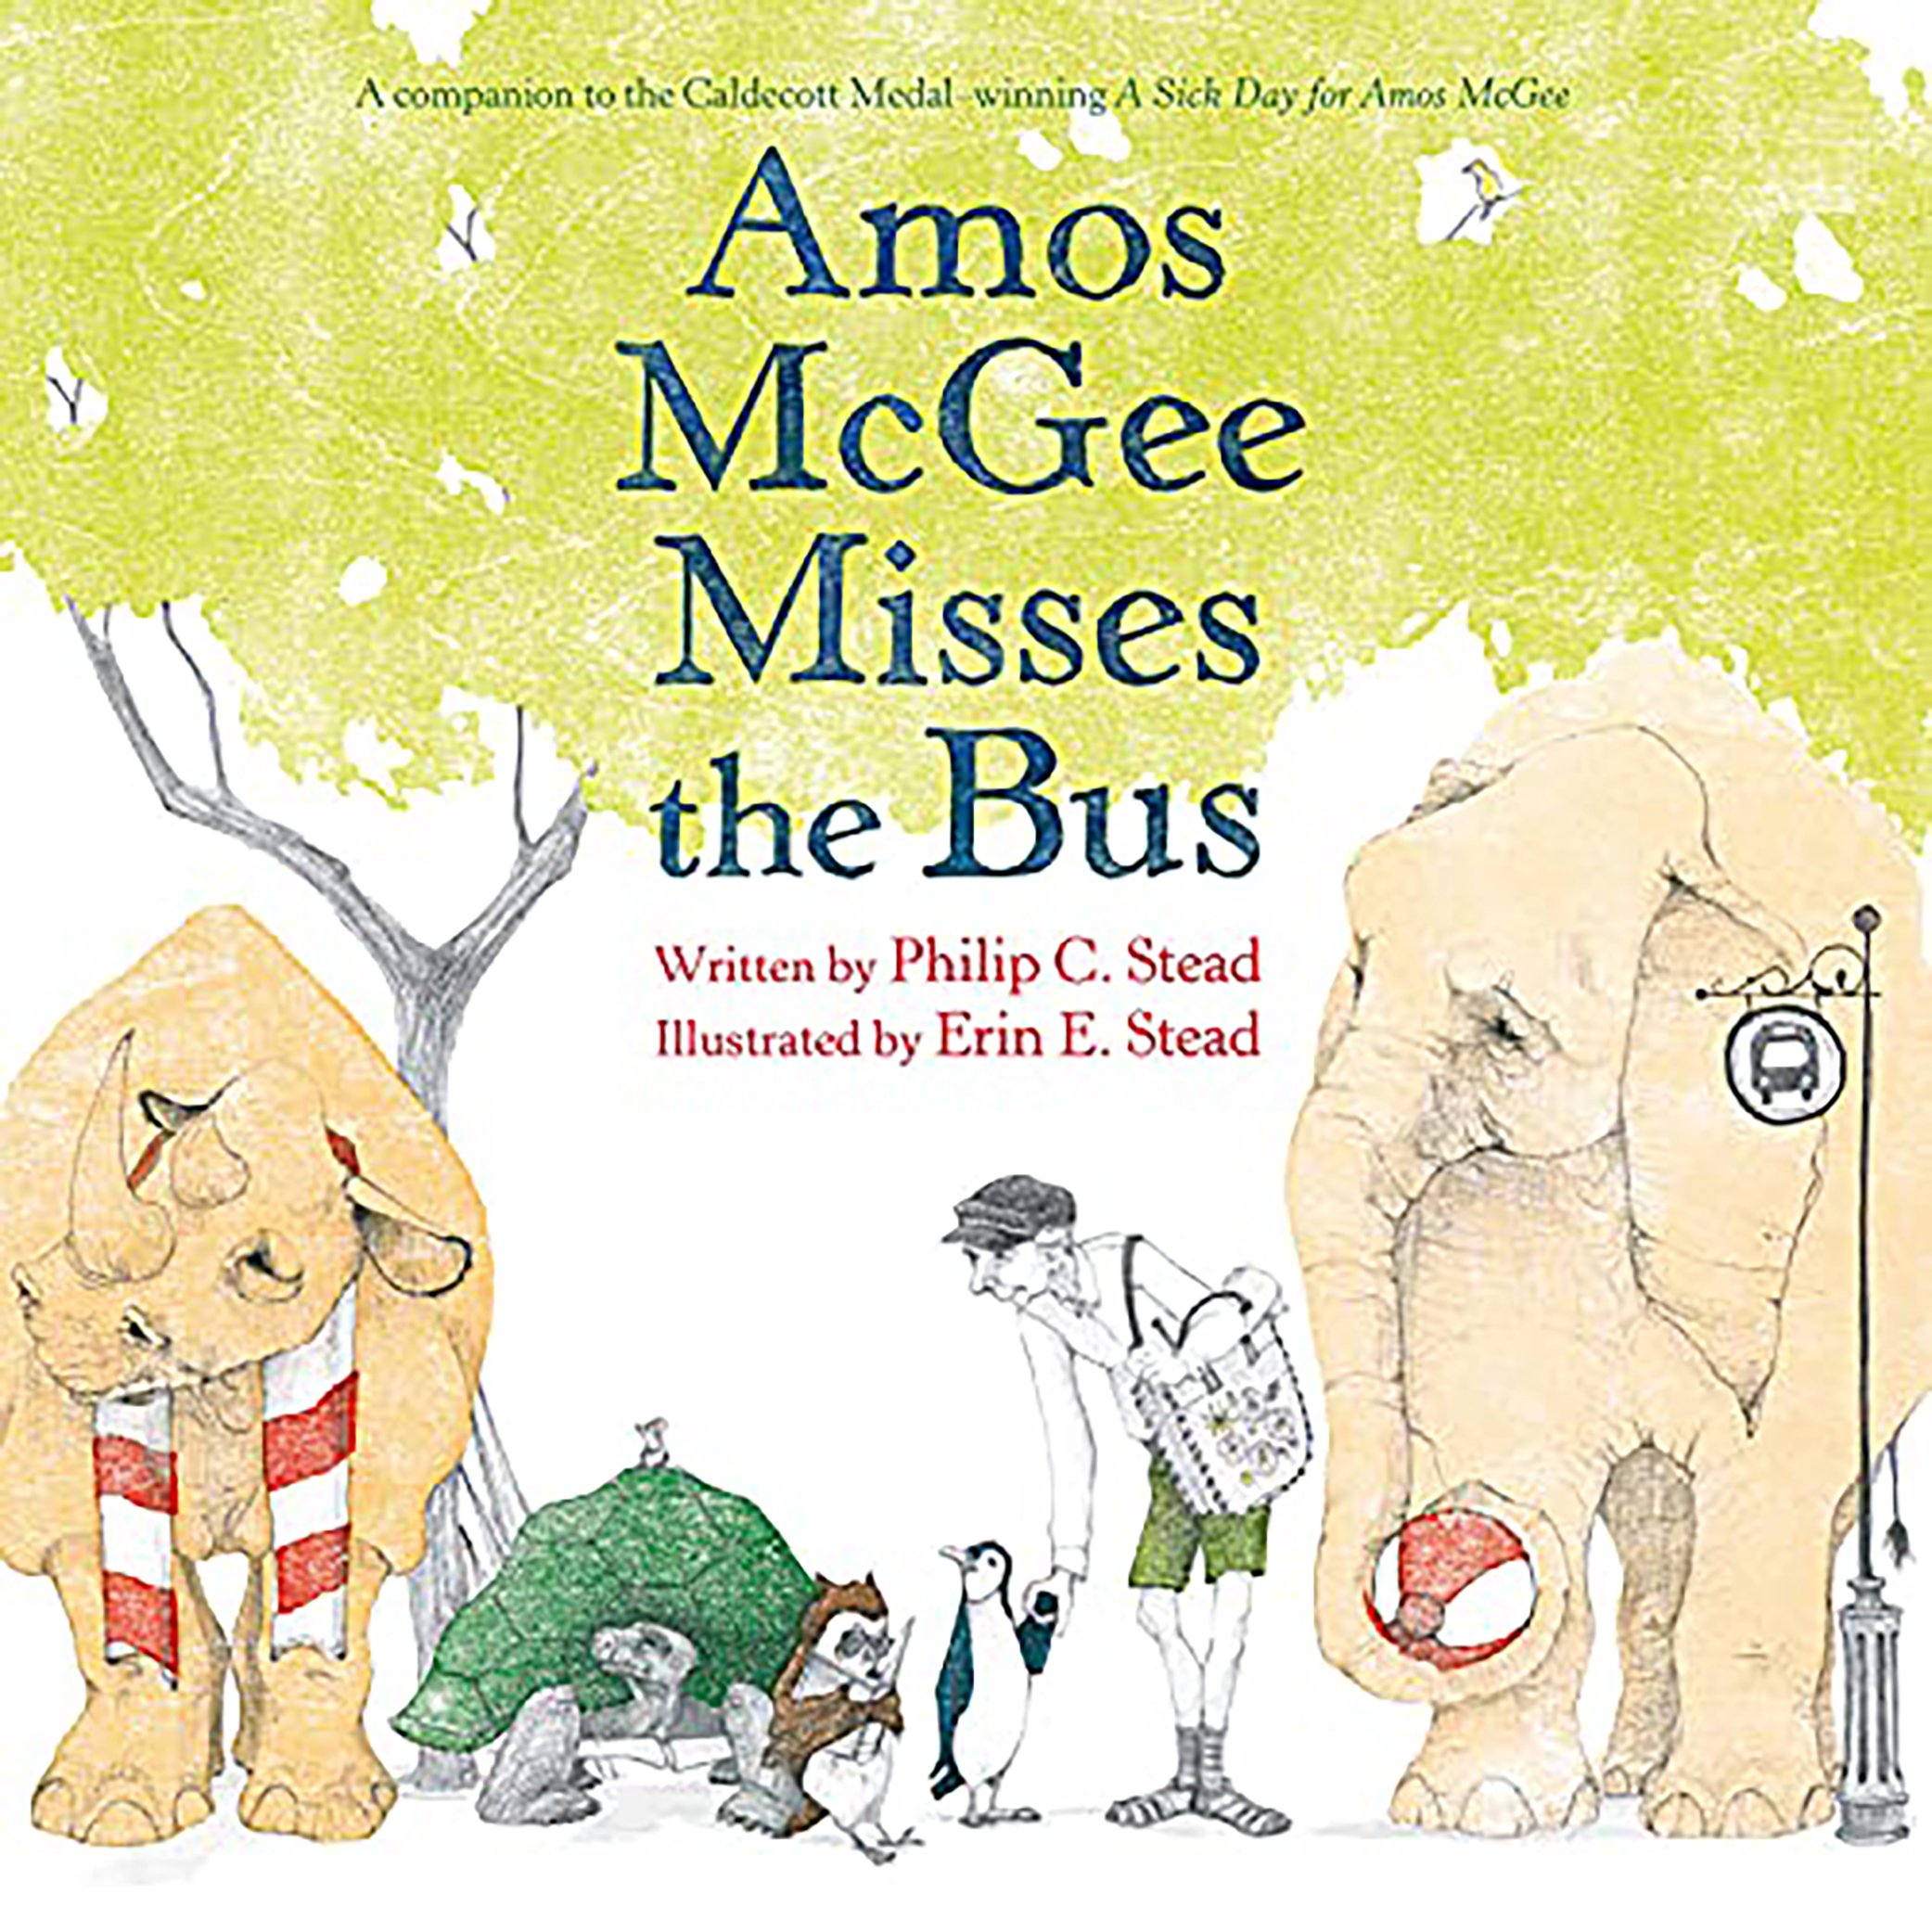 Audiobook Cover_Phillip C Stead_Amos McGee Misses the Bus.jpg